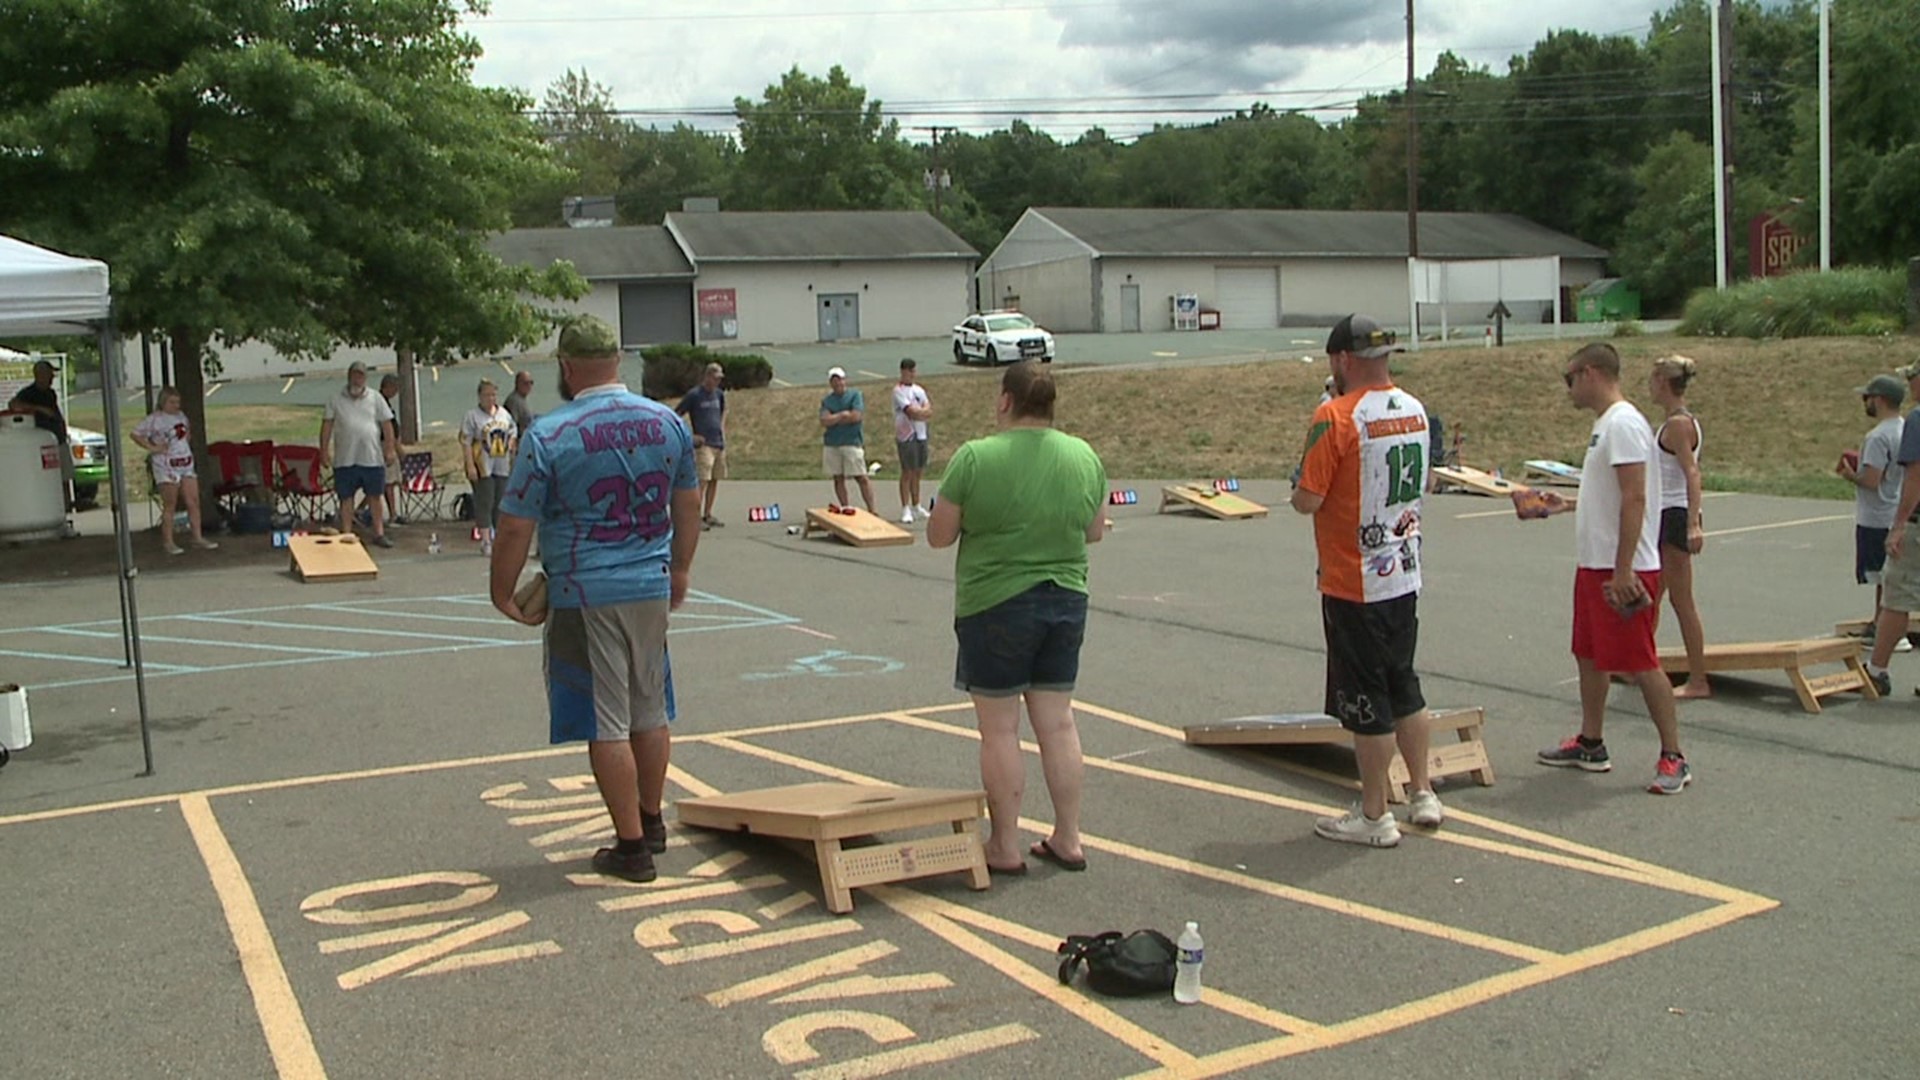 Susquehanna Brewing Company hosted the Keystone State Games Cornhole Tournament Sunday afternoon.